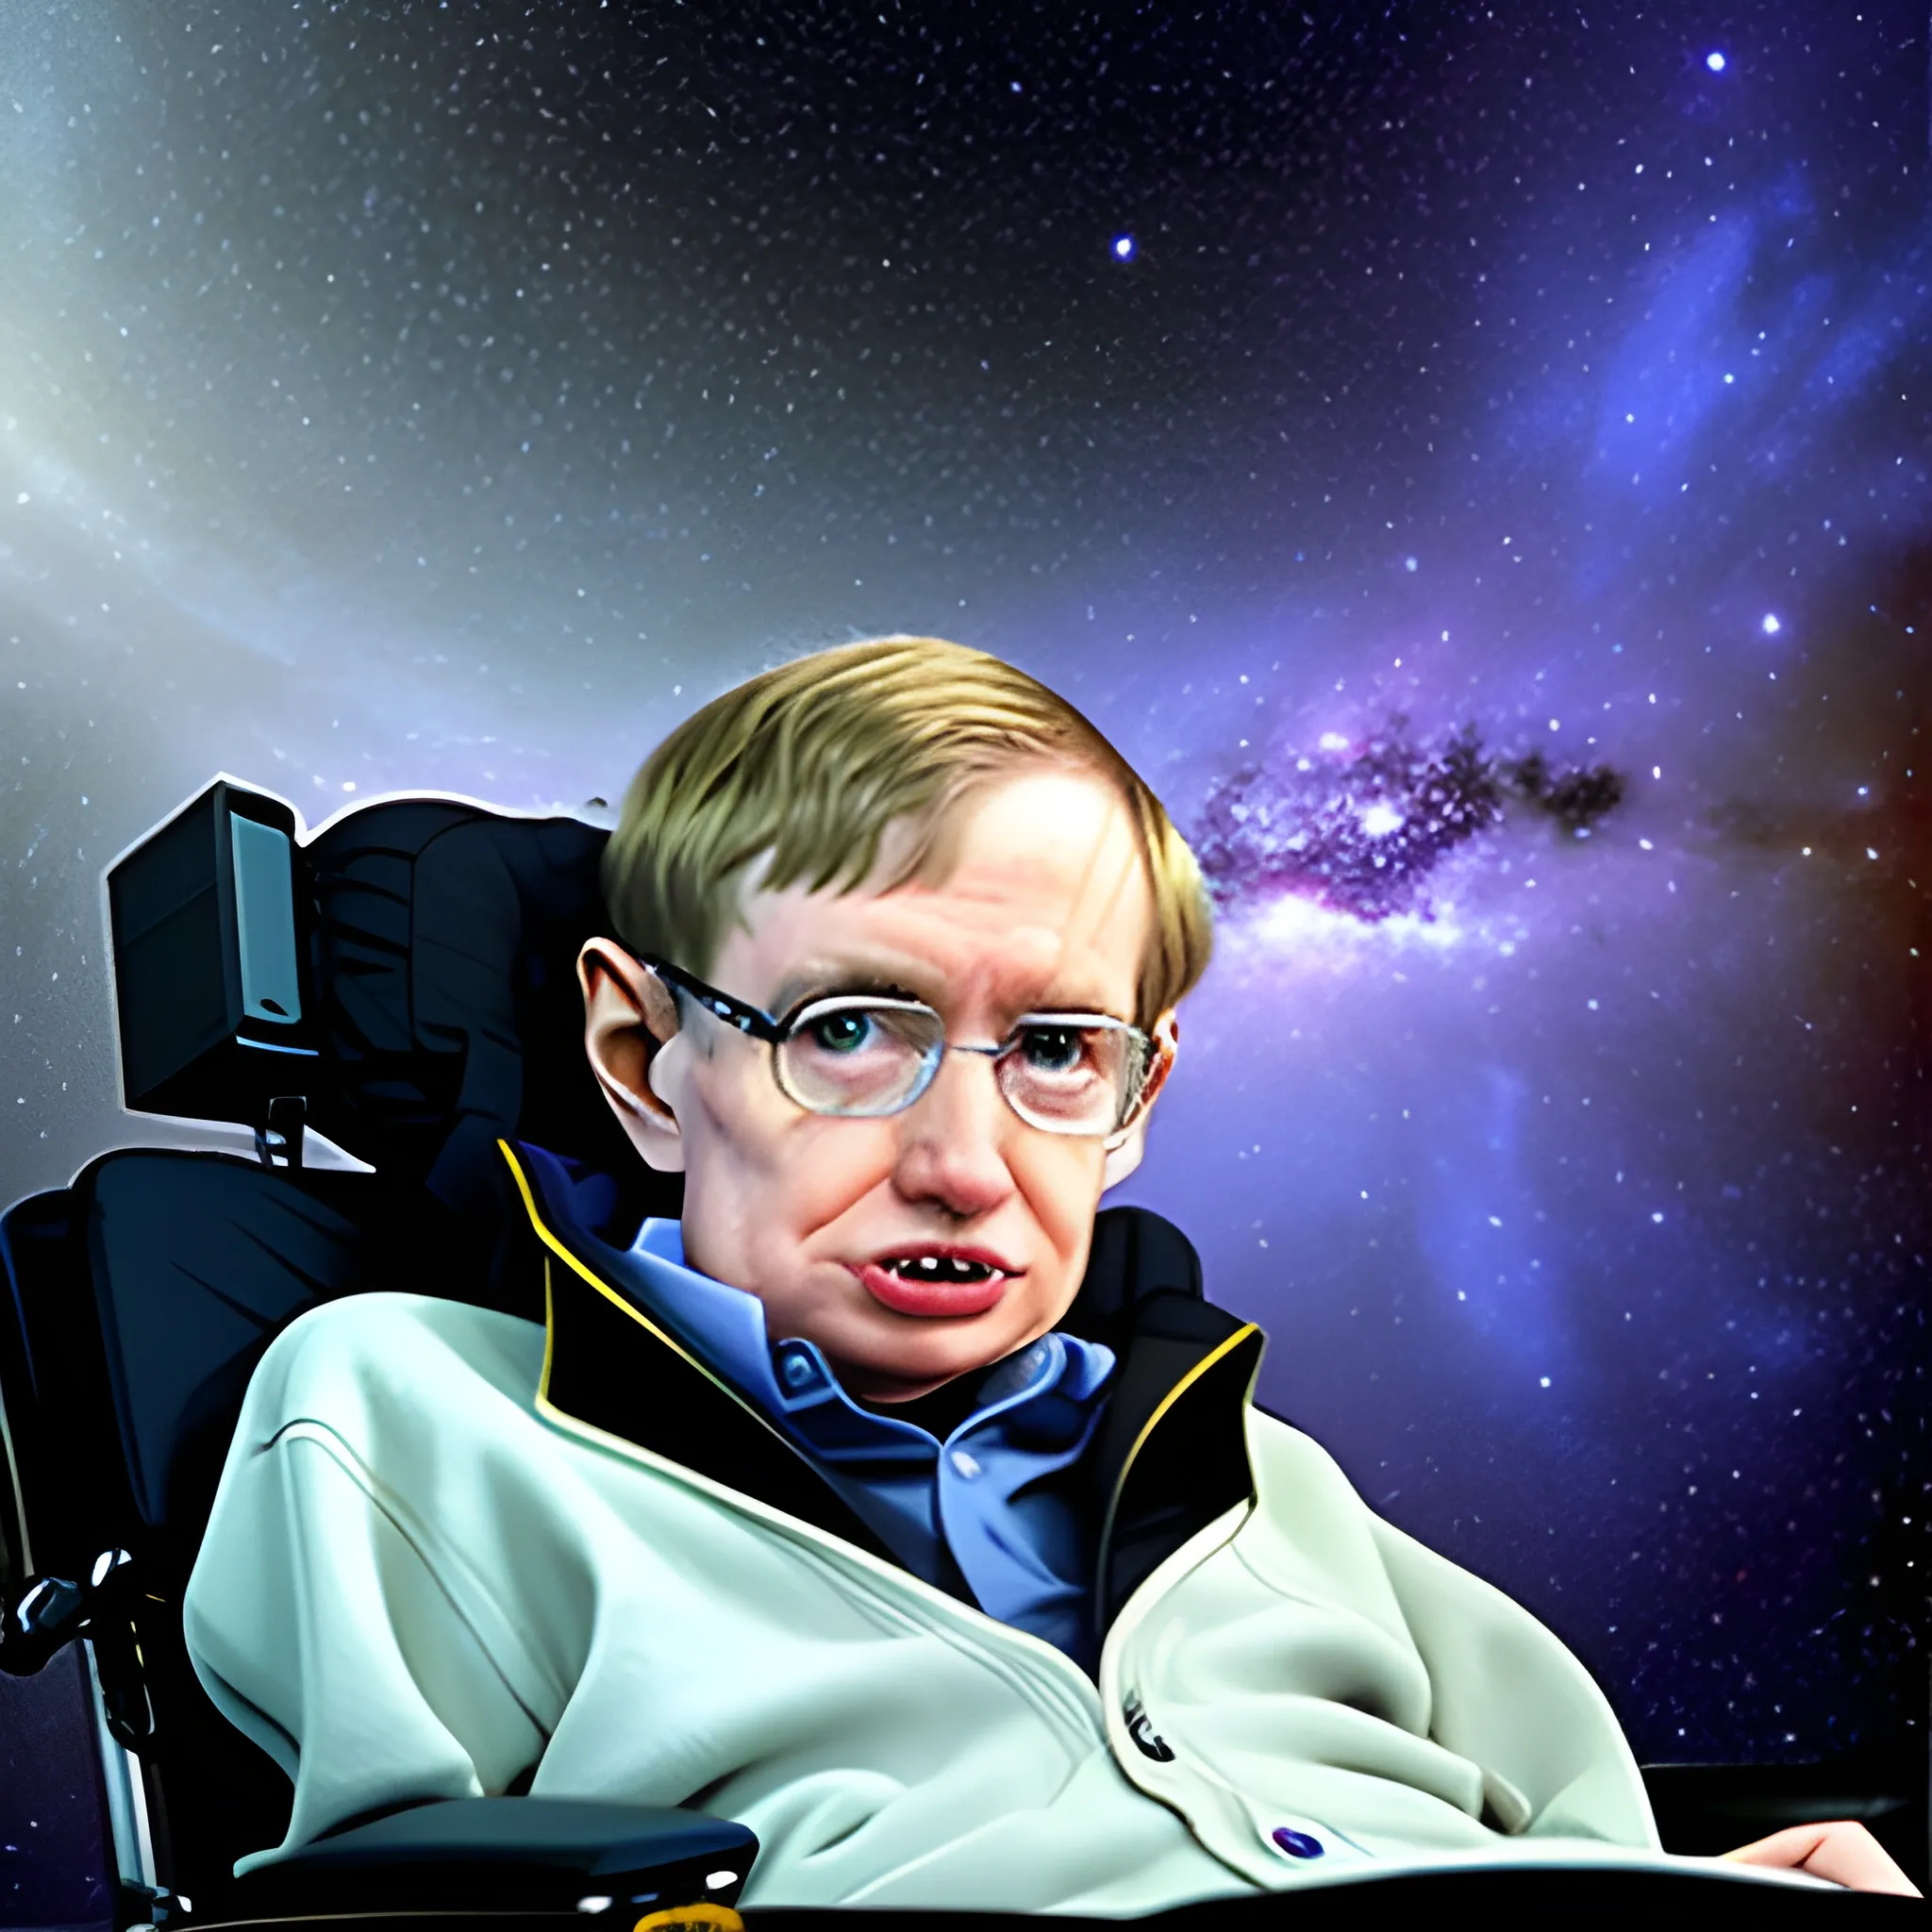 stephen hawking in the space, Trippy